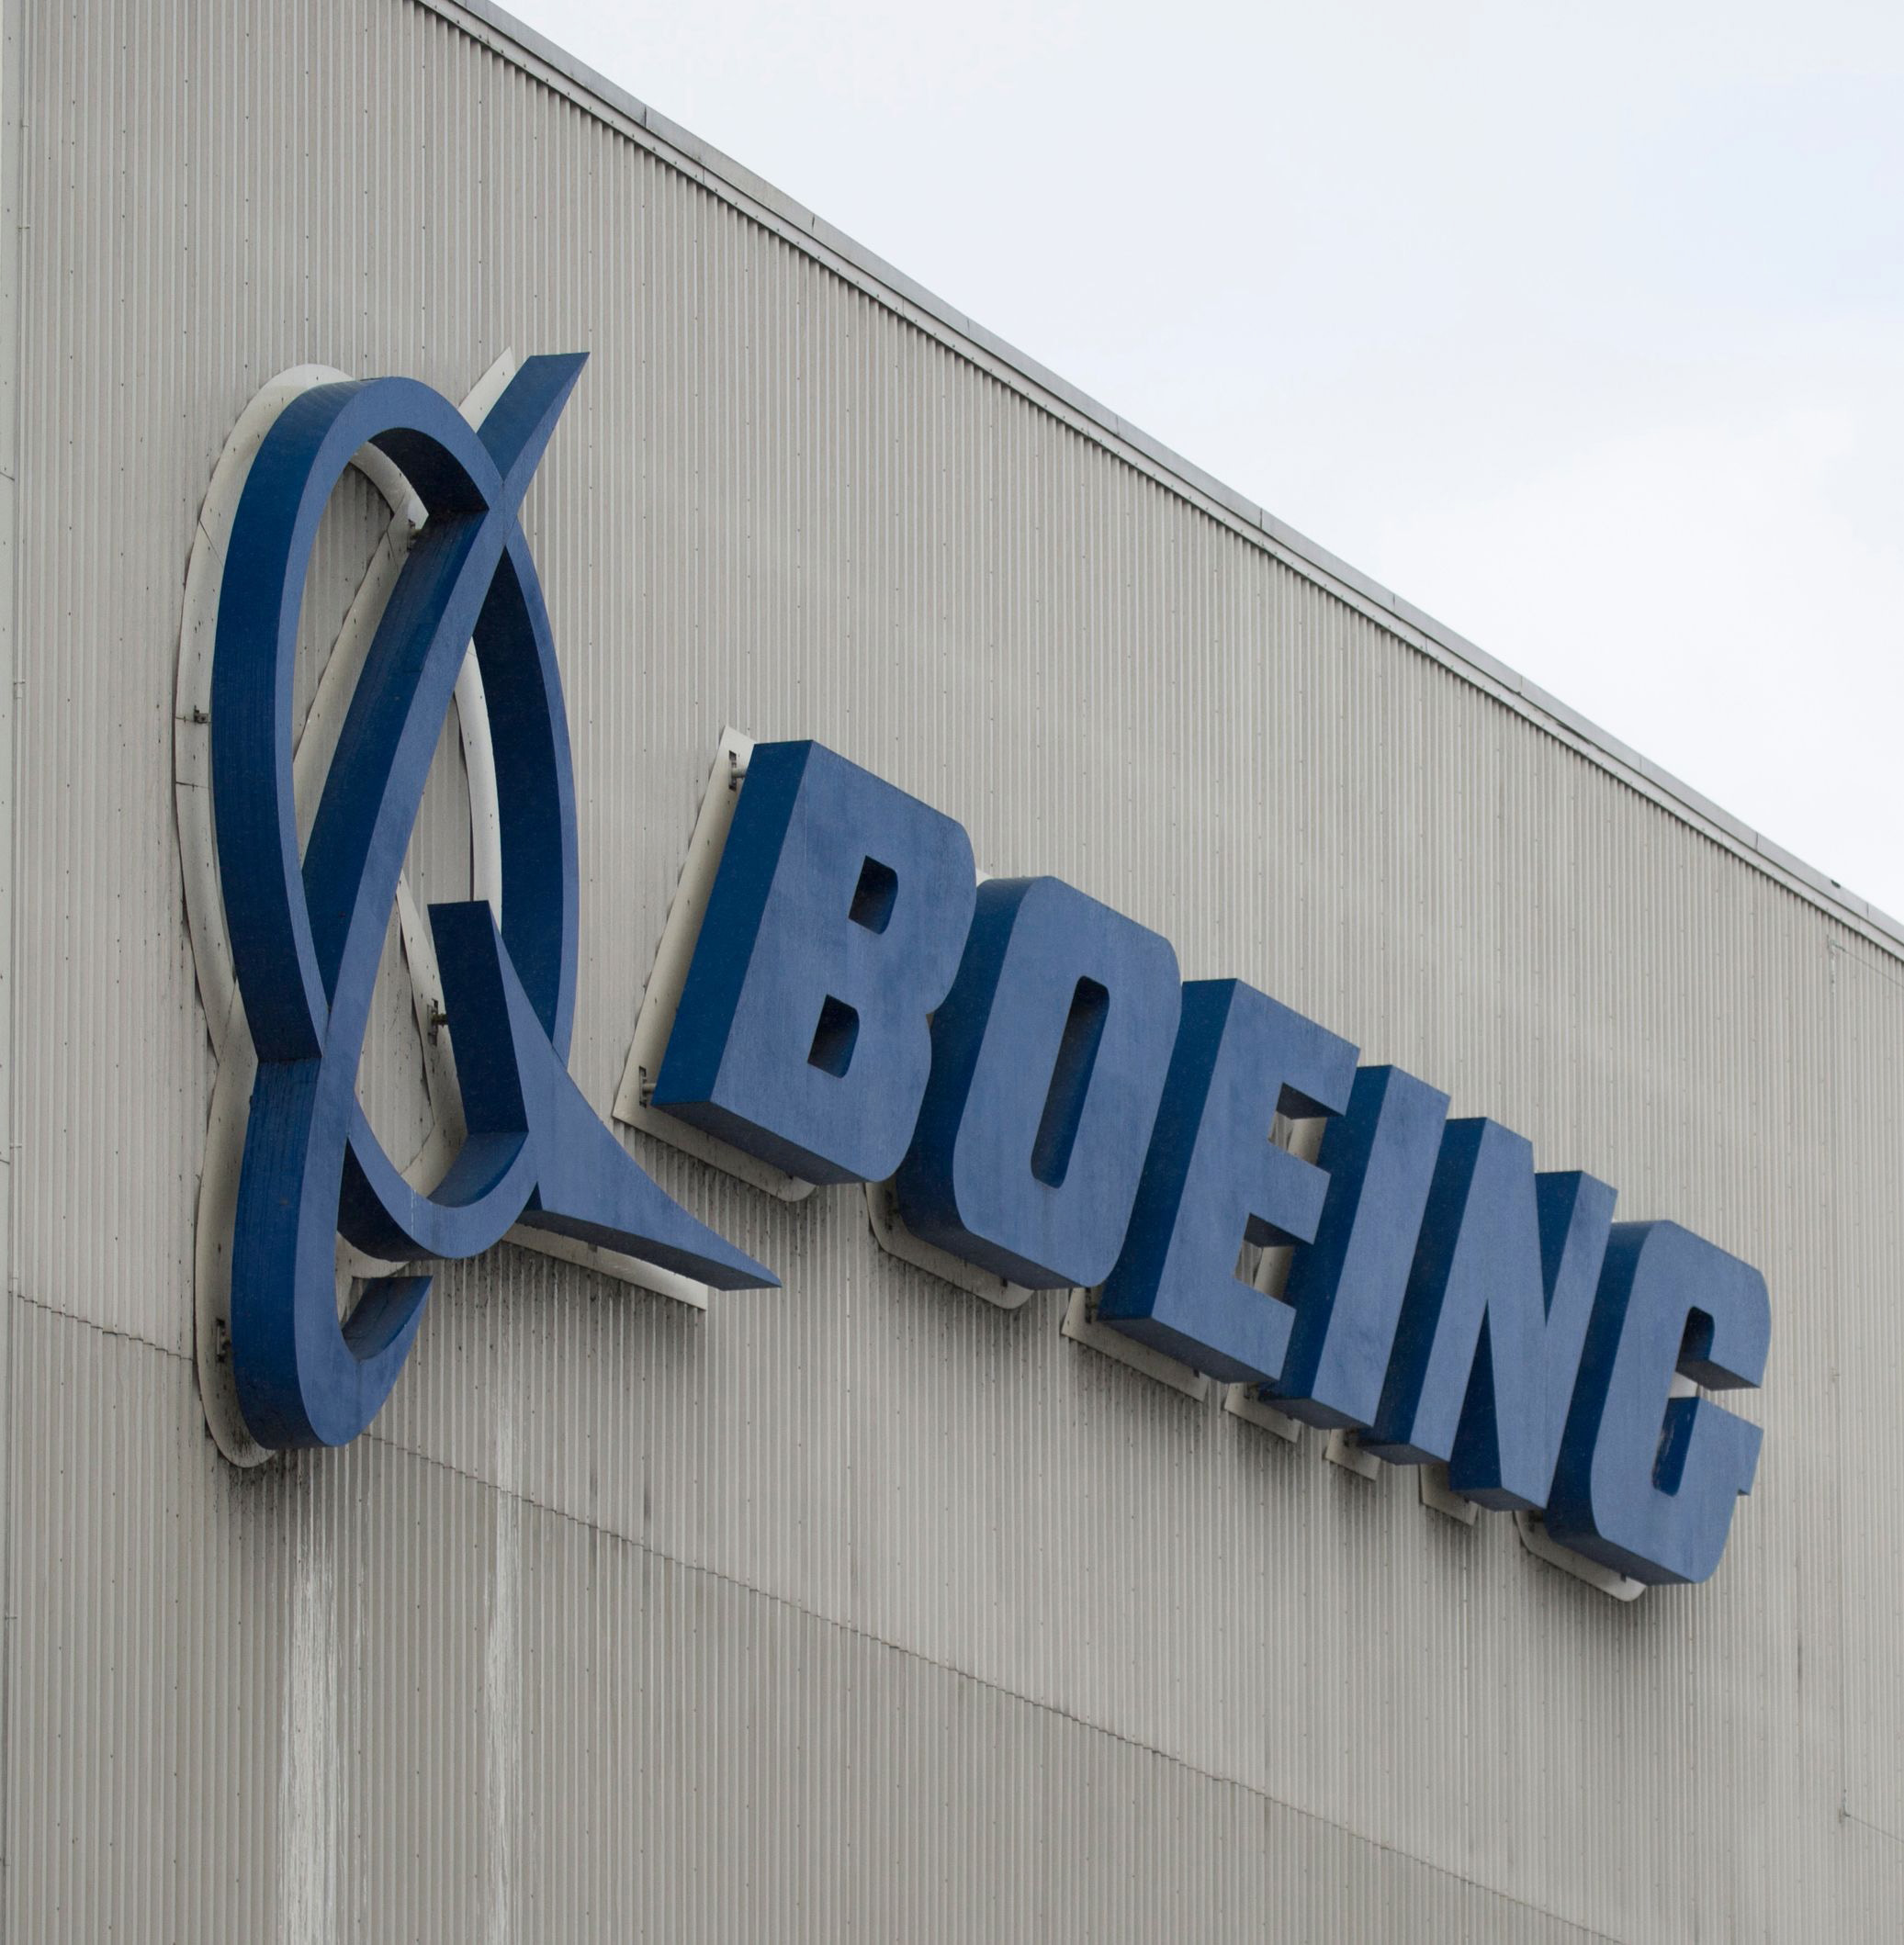 PHOTO: The Boeing logo at the Boeing Renton Factory in Renton, Wash., March 12, 2019.